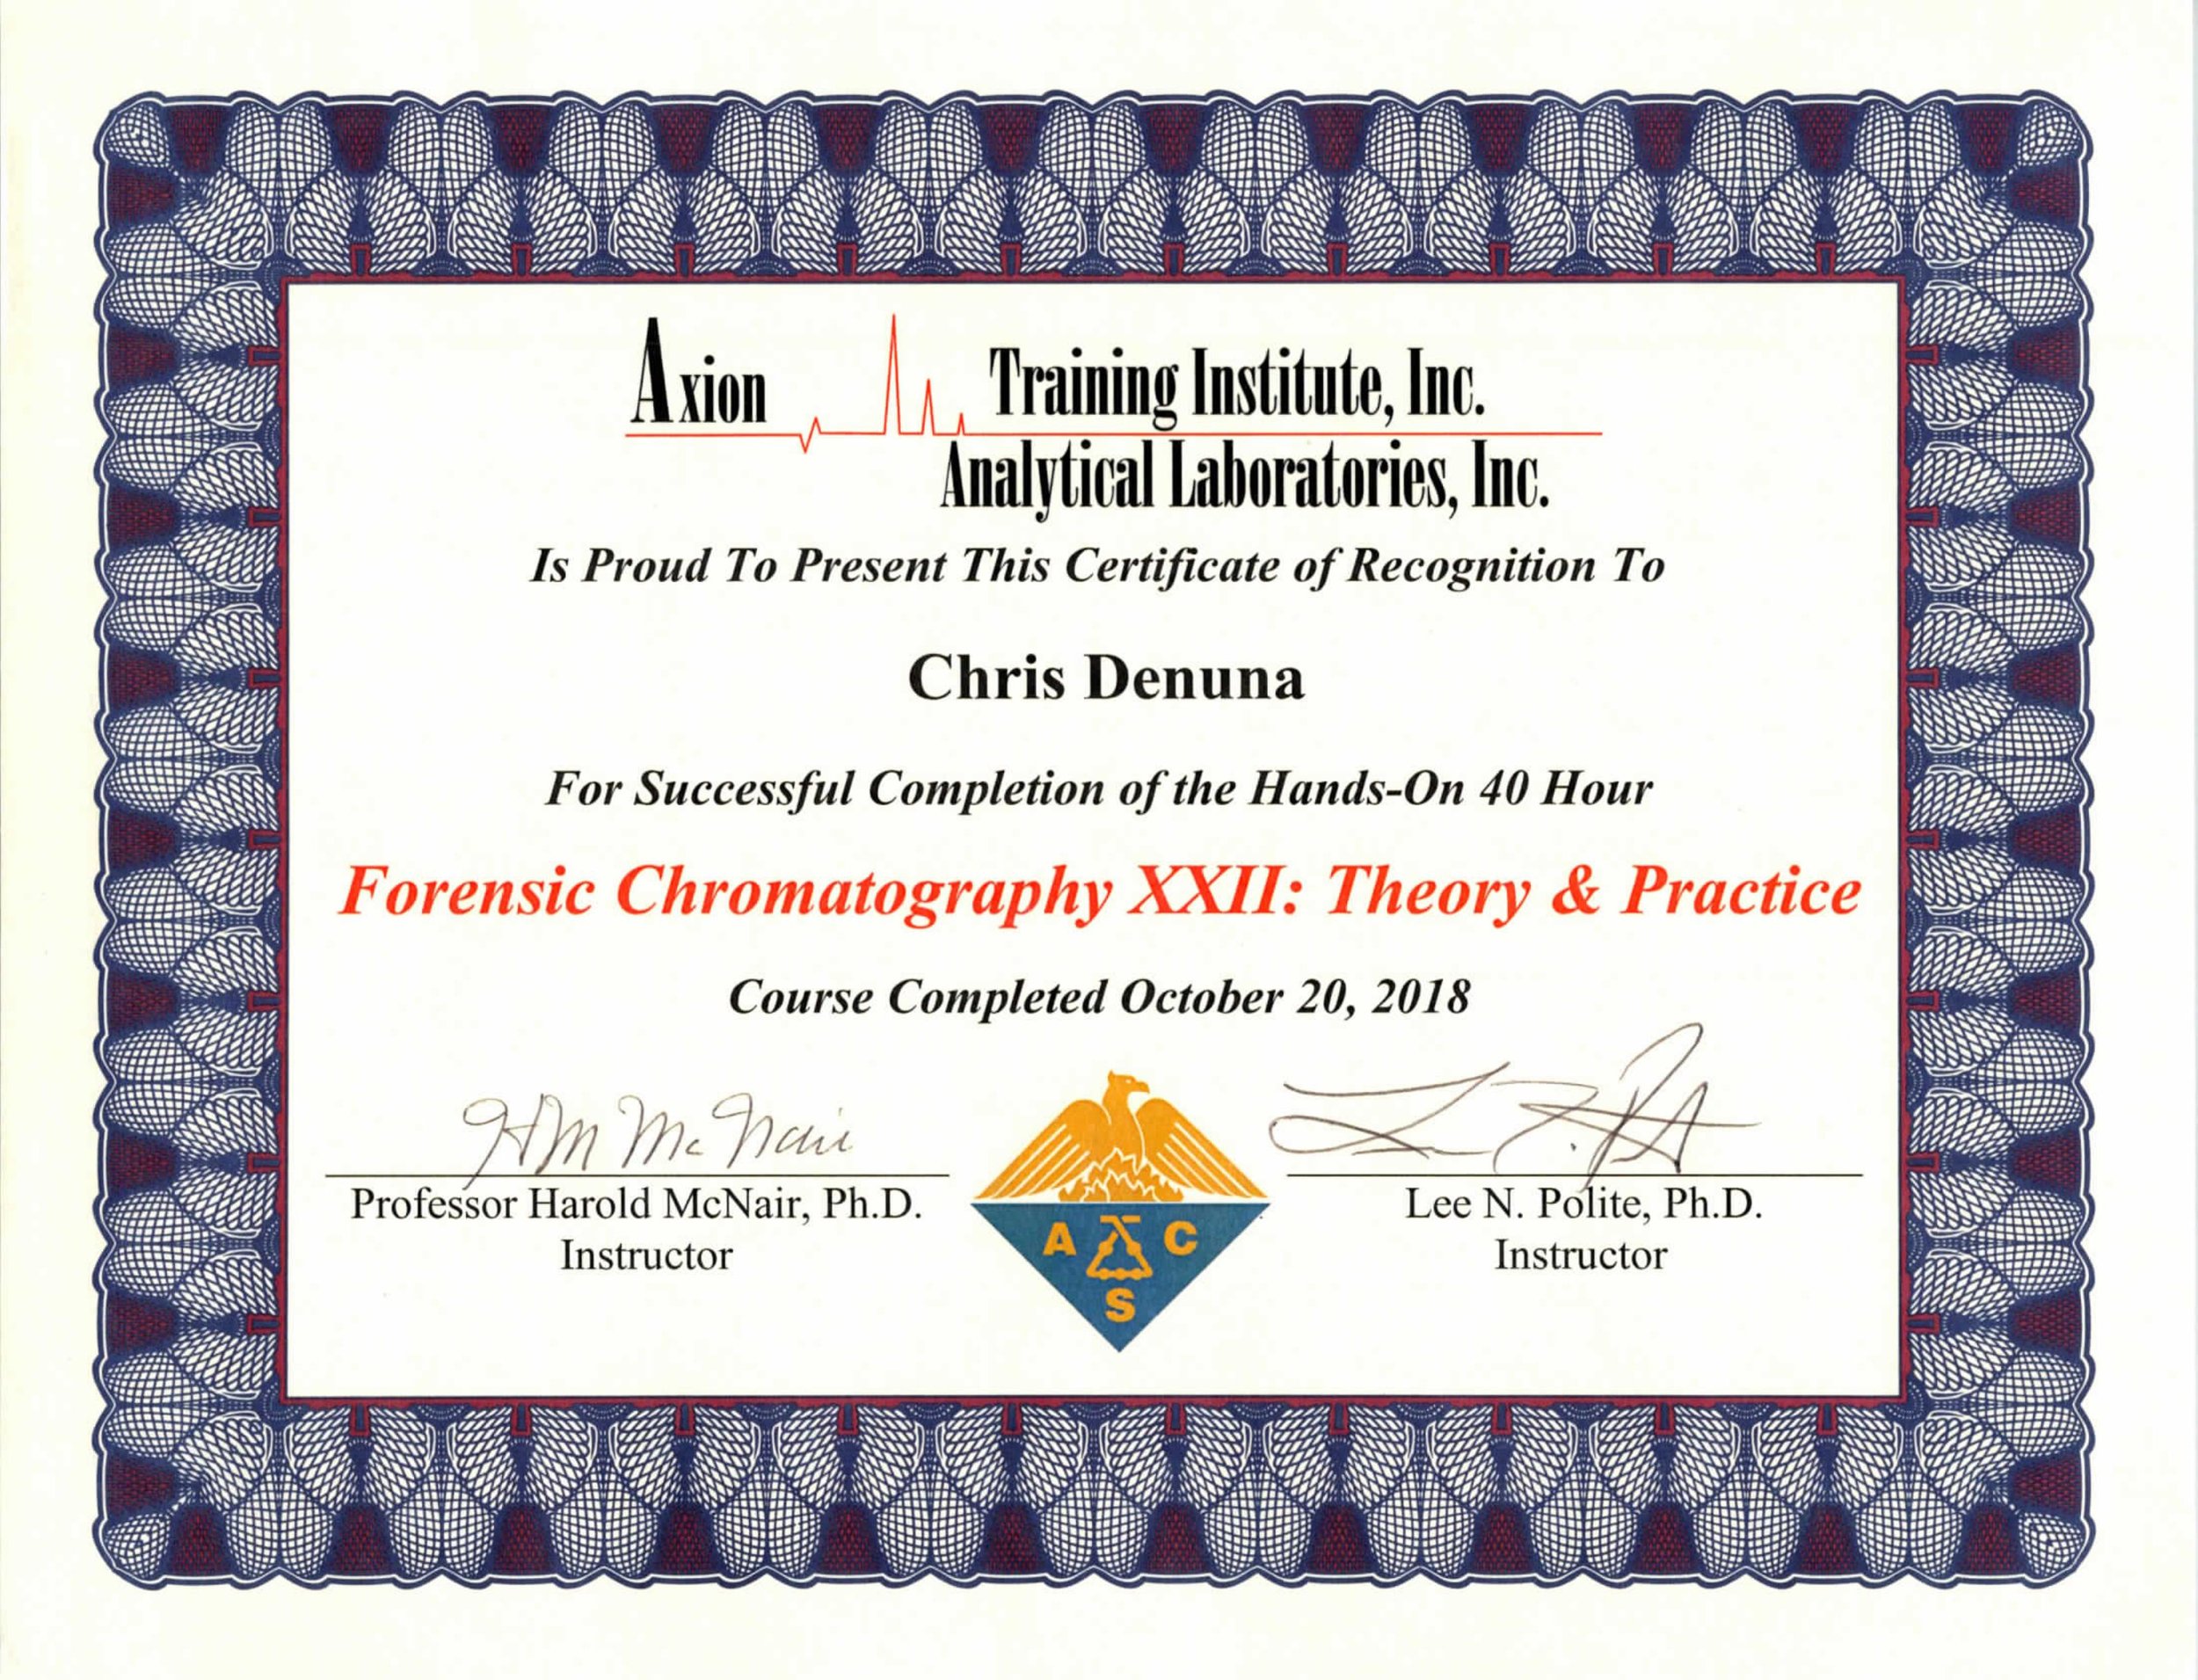 Axion Forensic Chromatography 2018 Certificate.jpg